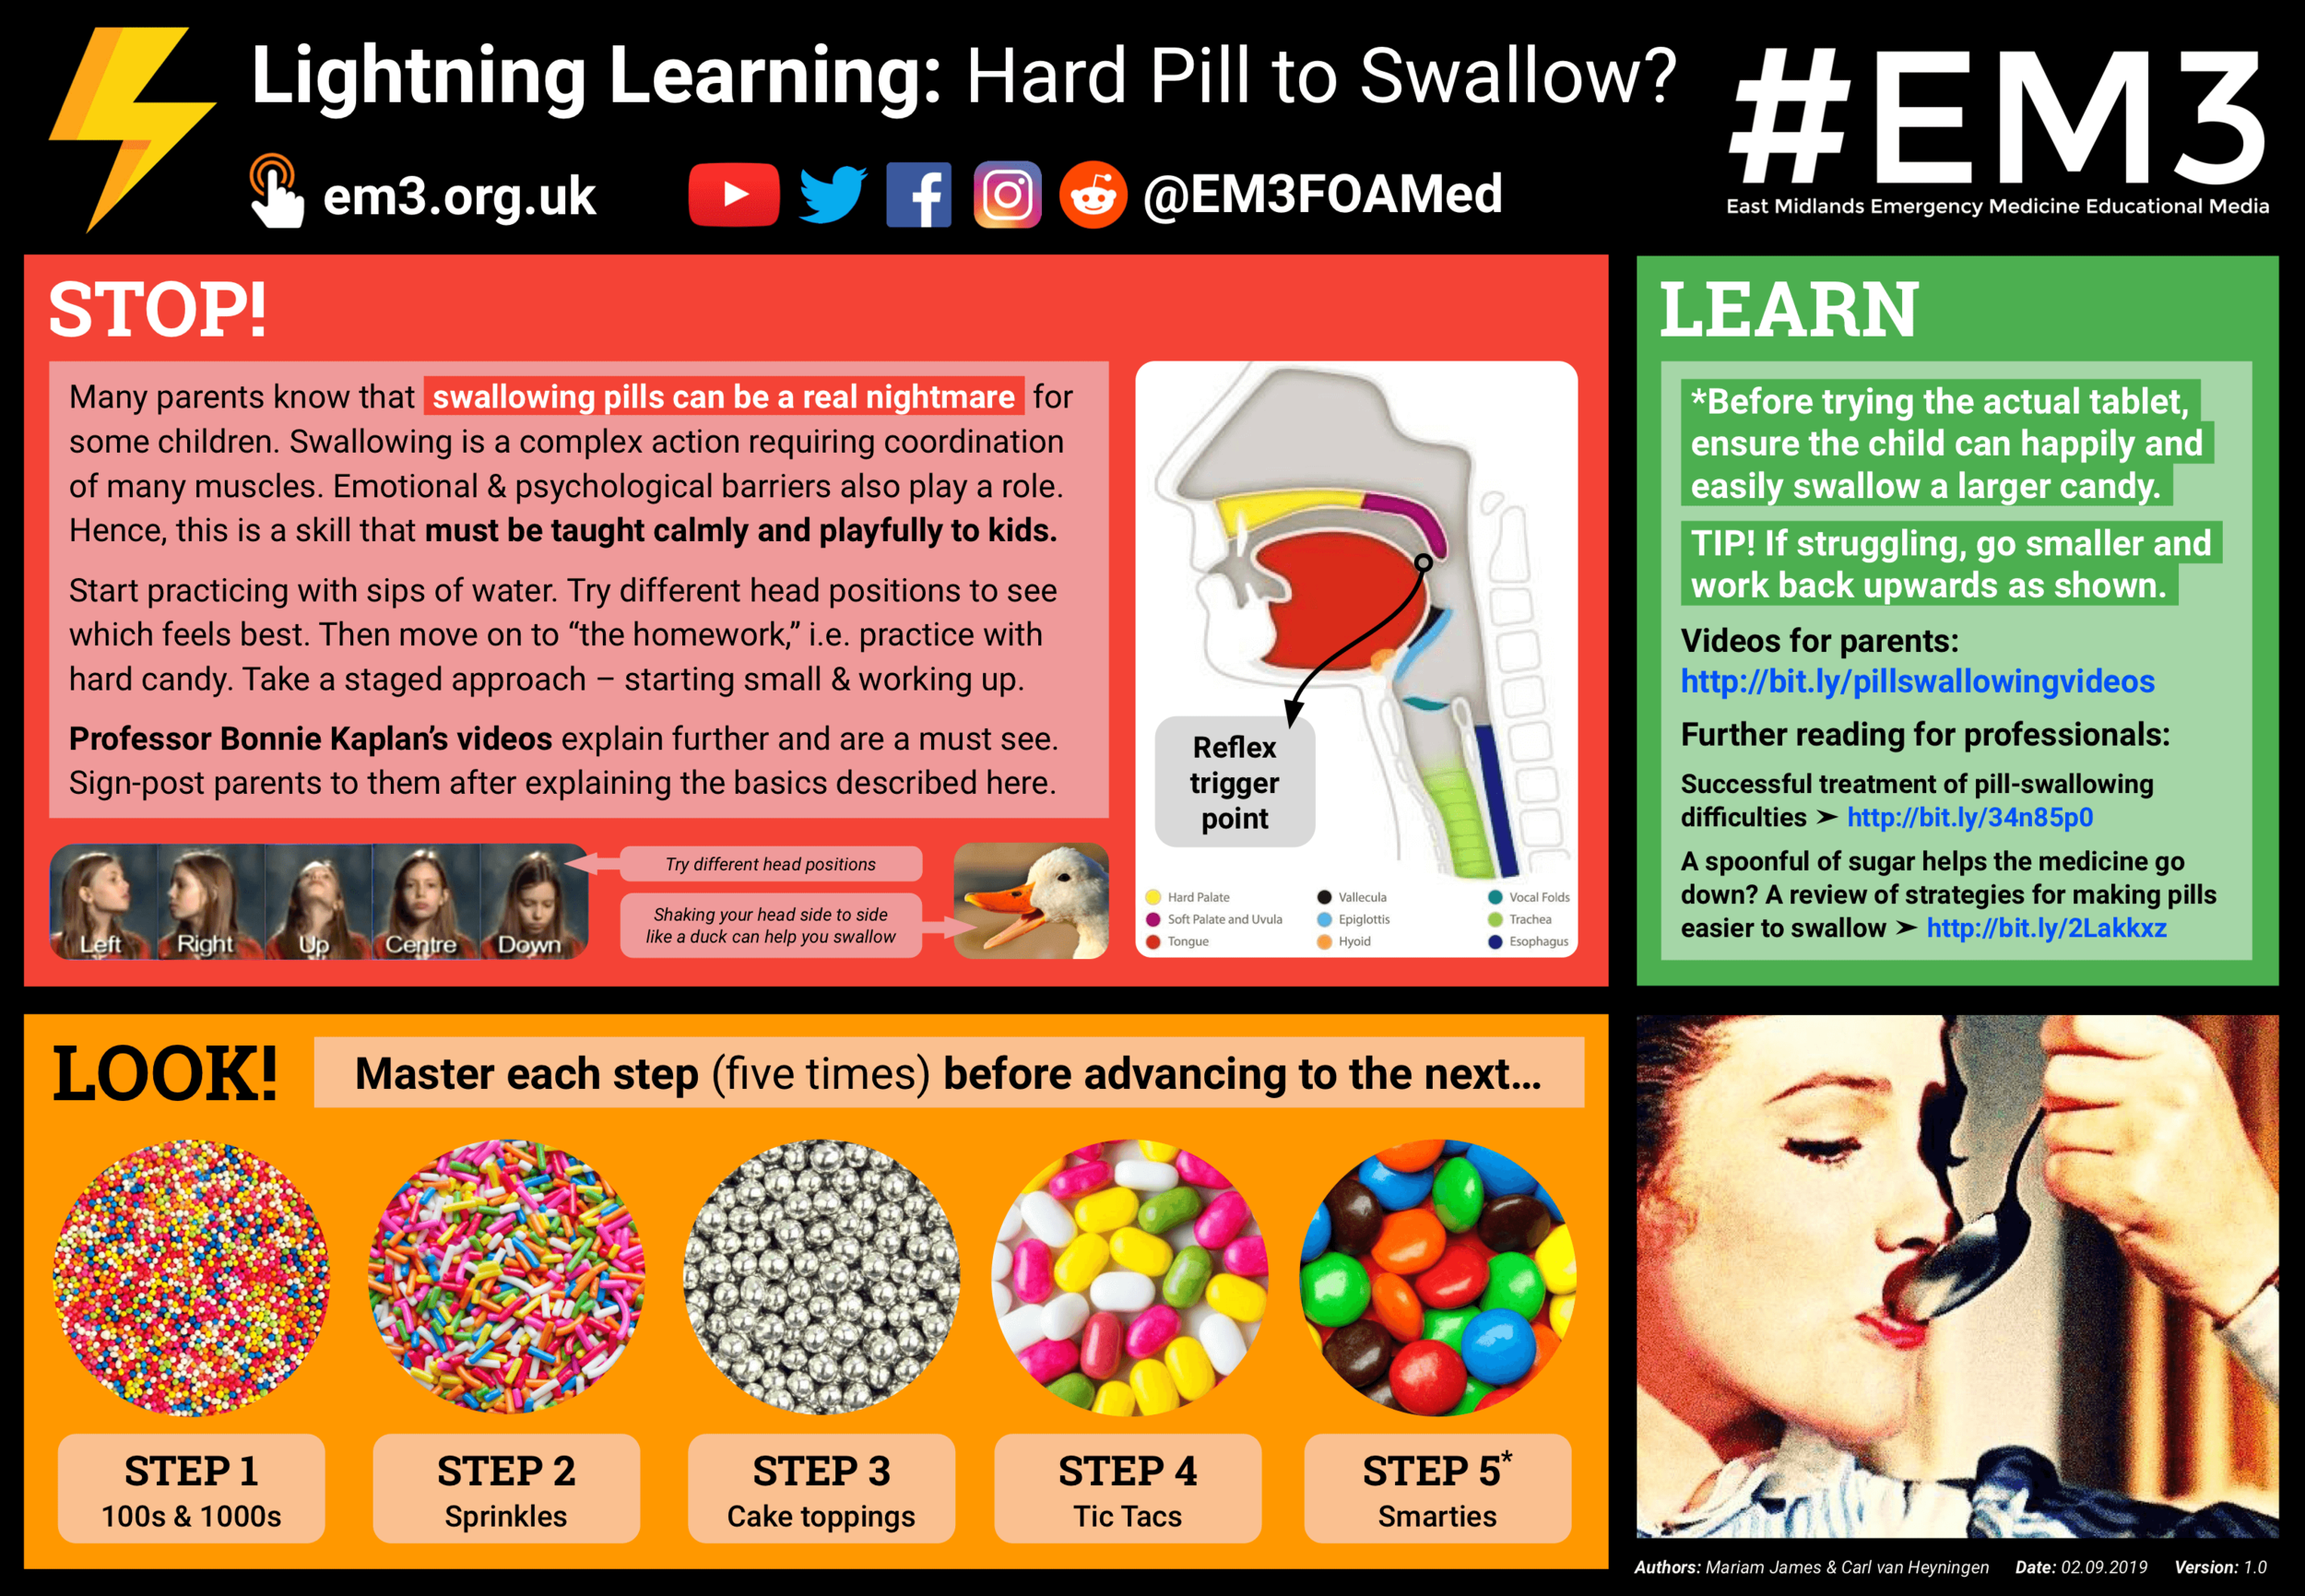 Lightning Learning: Pill to Swallow? EM3